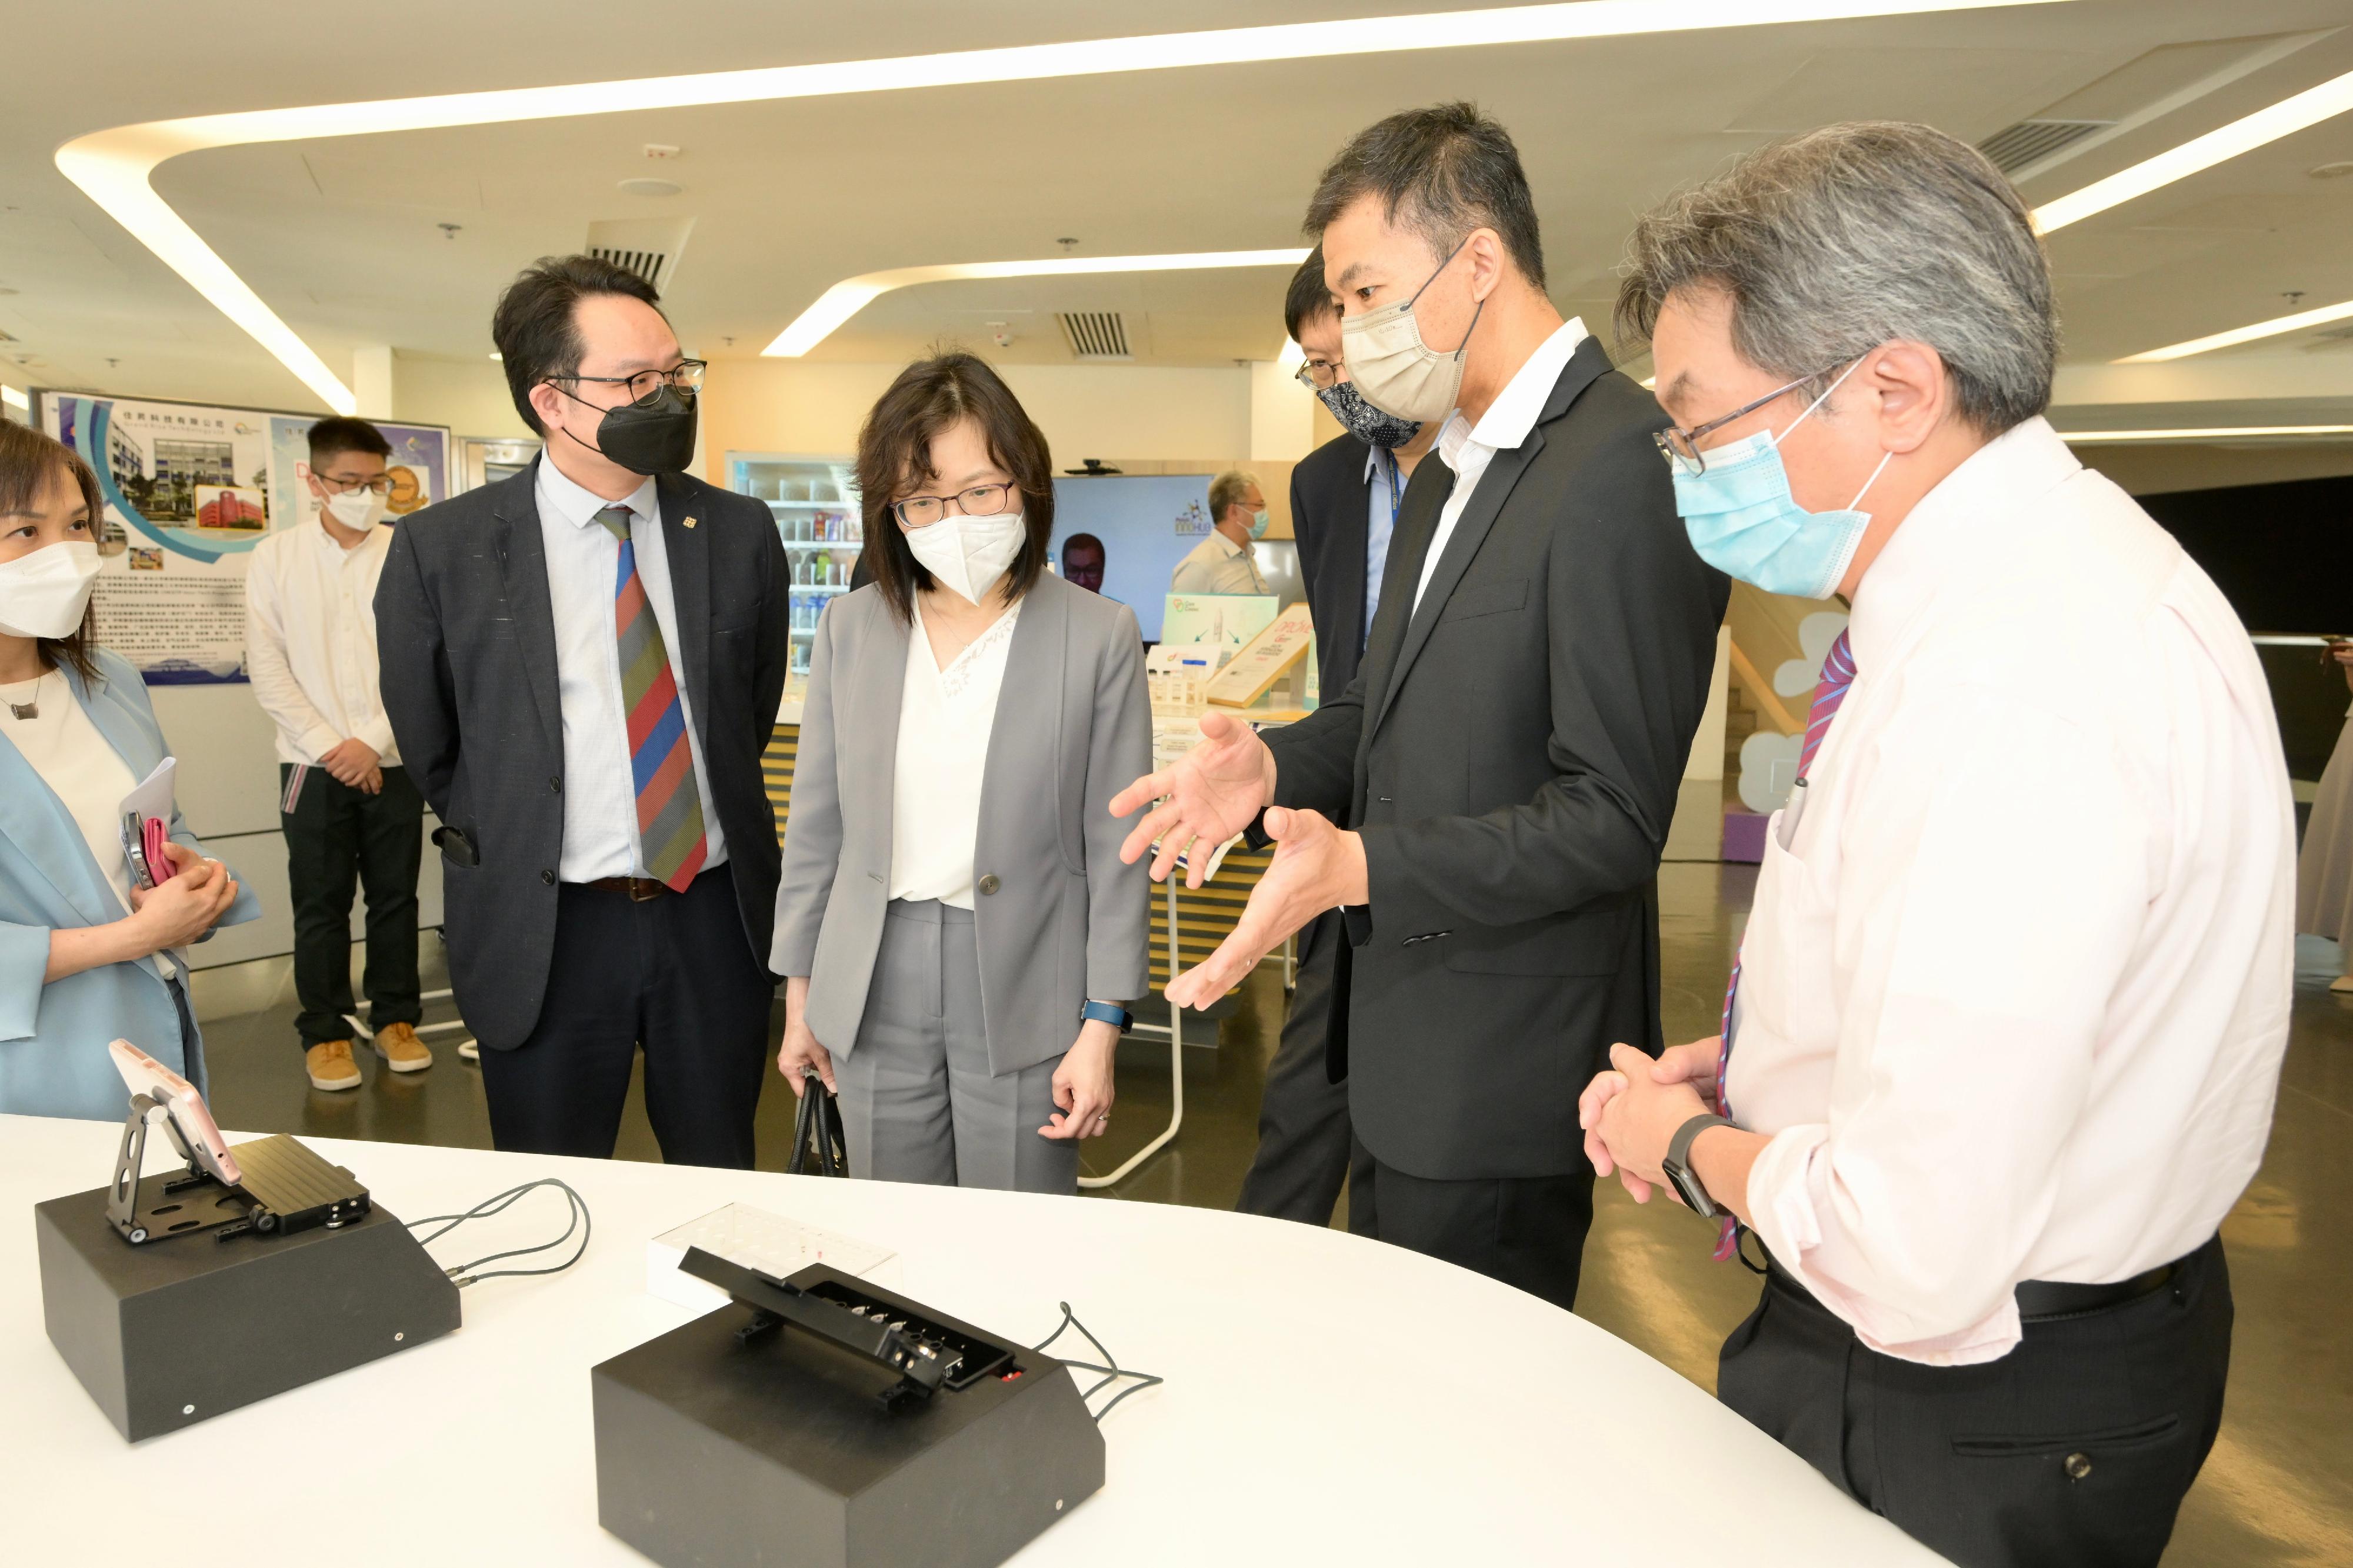 The Commissioner for Innovation and Technology, Ms Rebecca Pun, visited the Hong Kong Polytechnic University on April 27 and met with research teams. Photo shows Ms Pun (third right) receiving a briefing on a portable nucleic acid testing device for COVID-19.